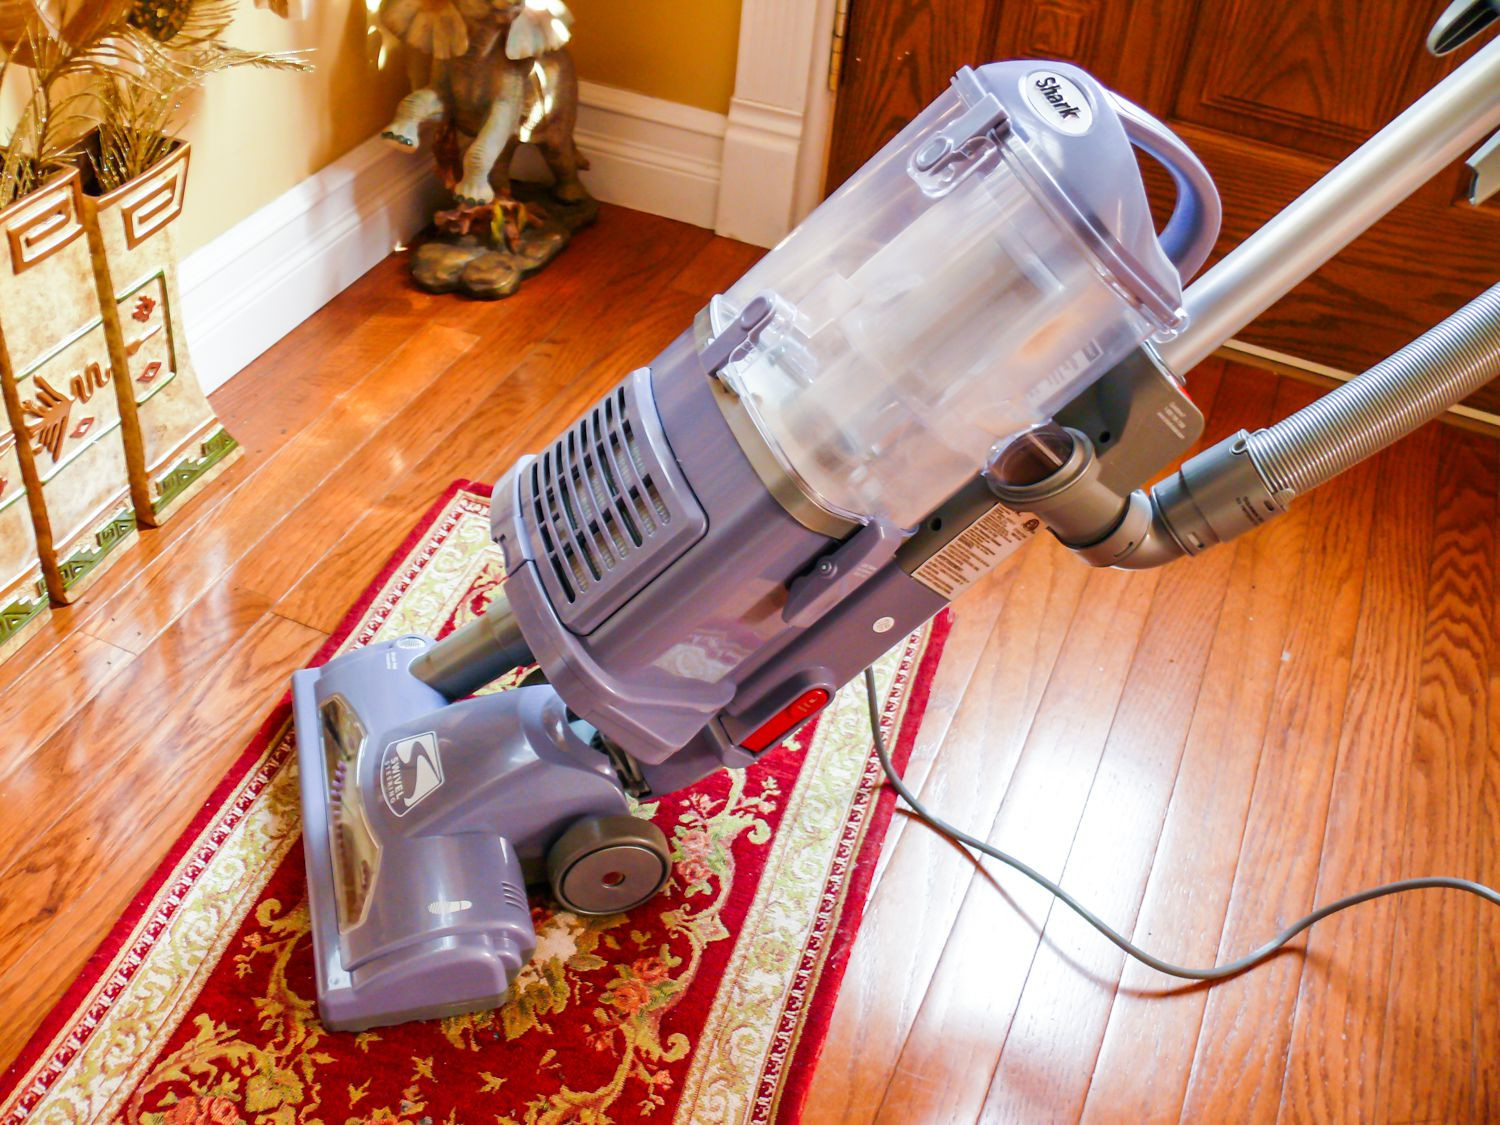 best vacuum for hardwood floors 2015 of the 10 best vacuum cleaners to buy in 2018 with regard to 4062974 2 2 5bbf718a46e0fb00519d59a7